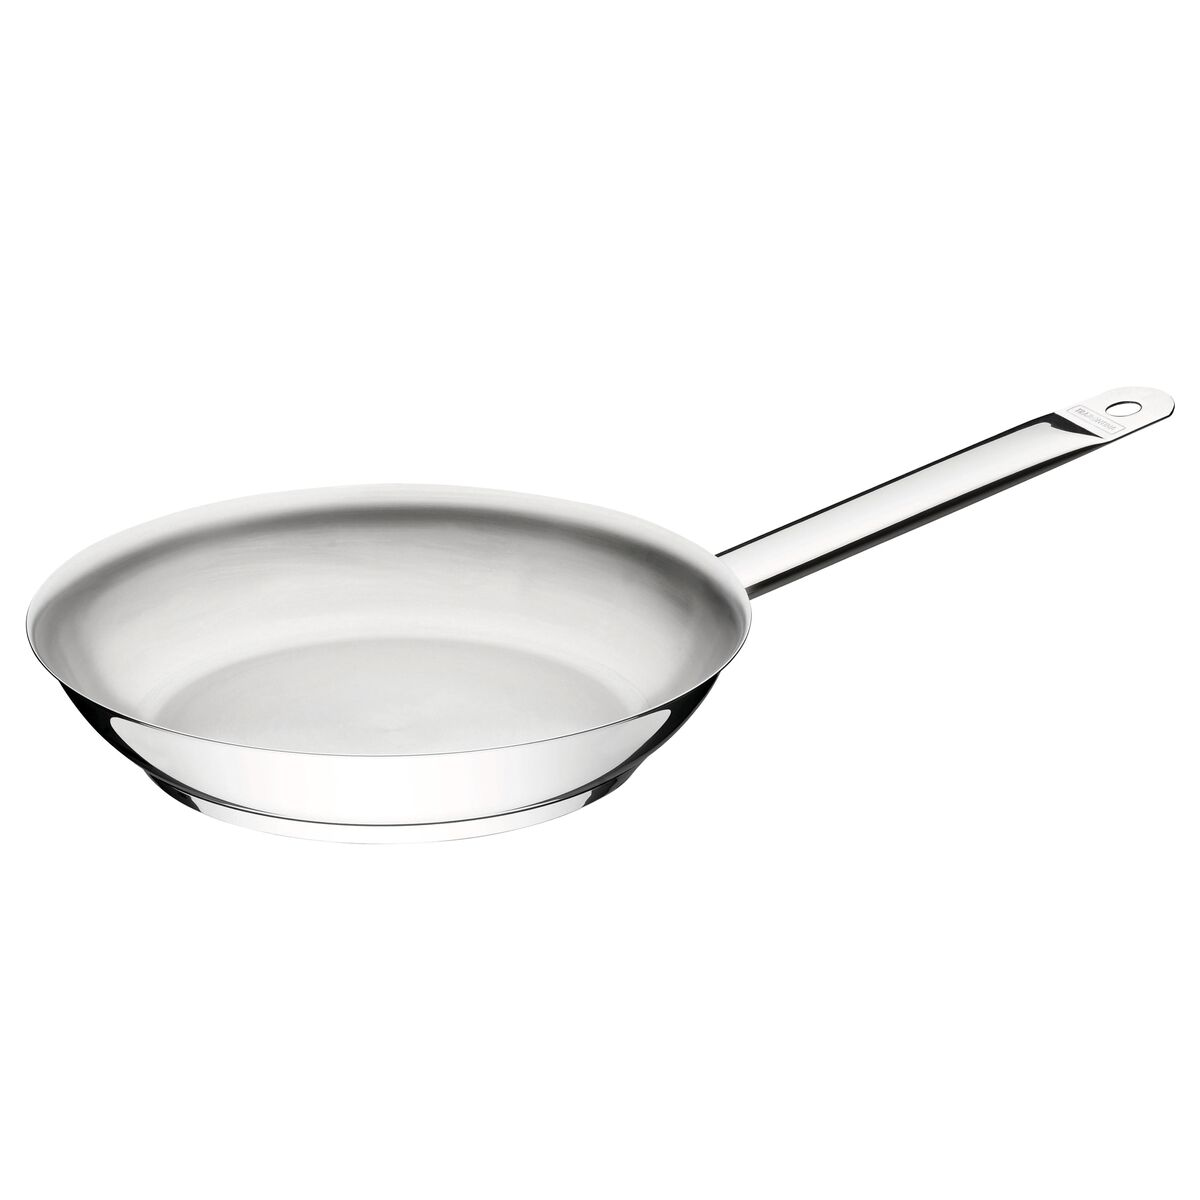 Tramontina Professional 30 cm 2.9 L shallow stainless steel frying pan with long handle and tri-ply base